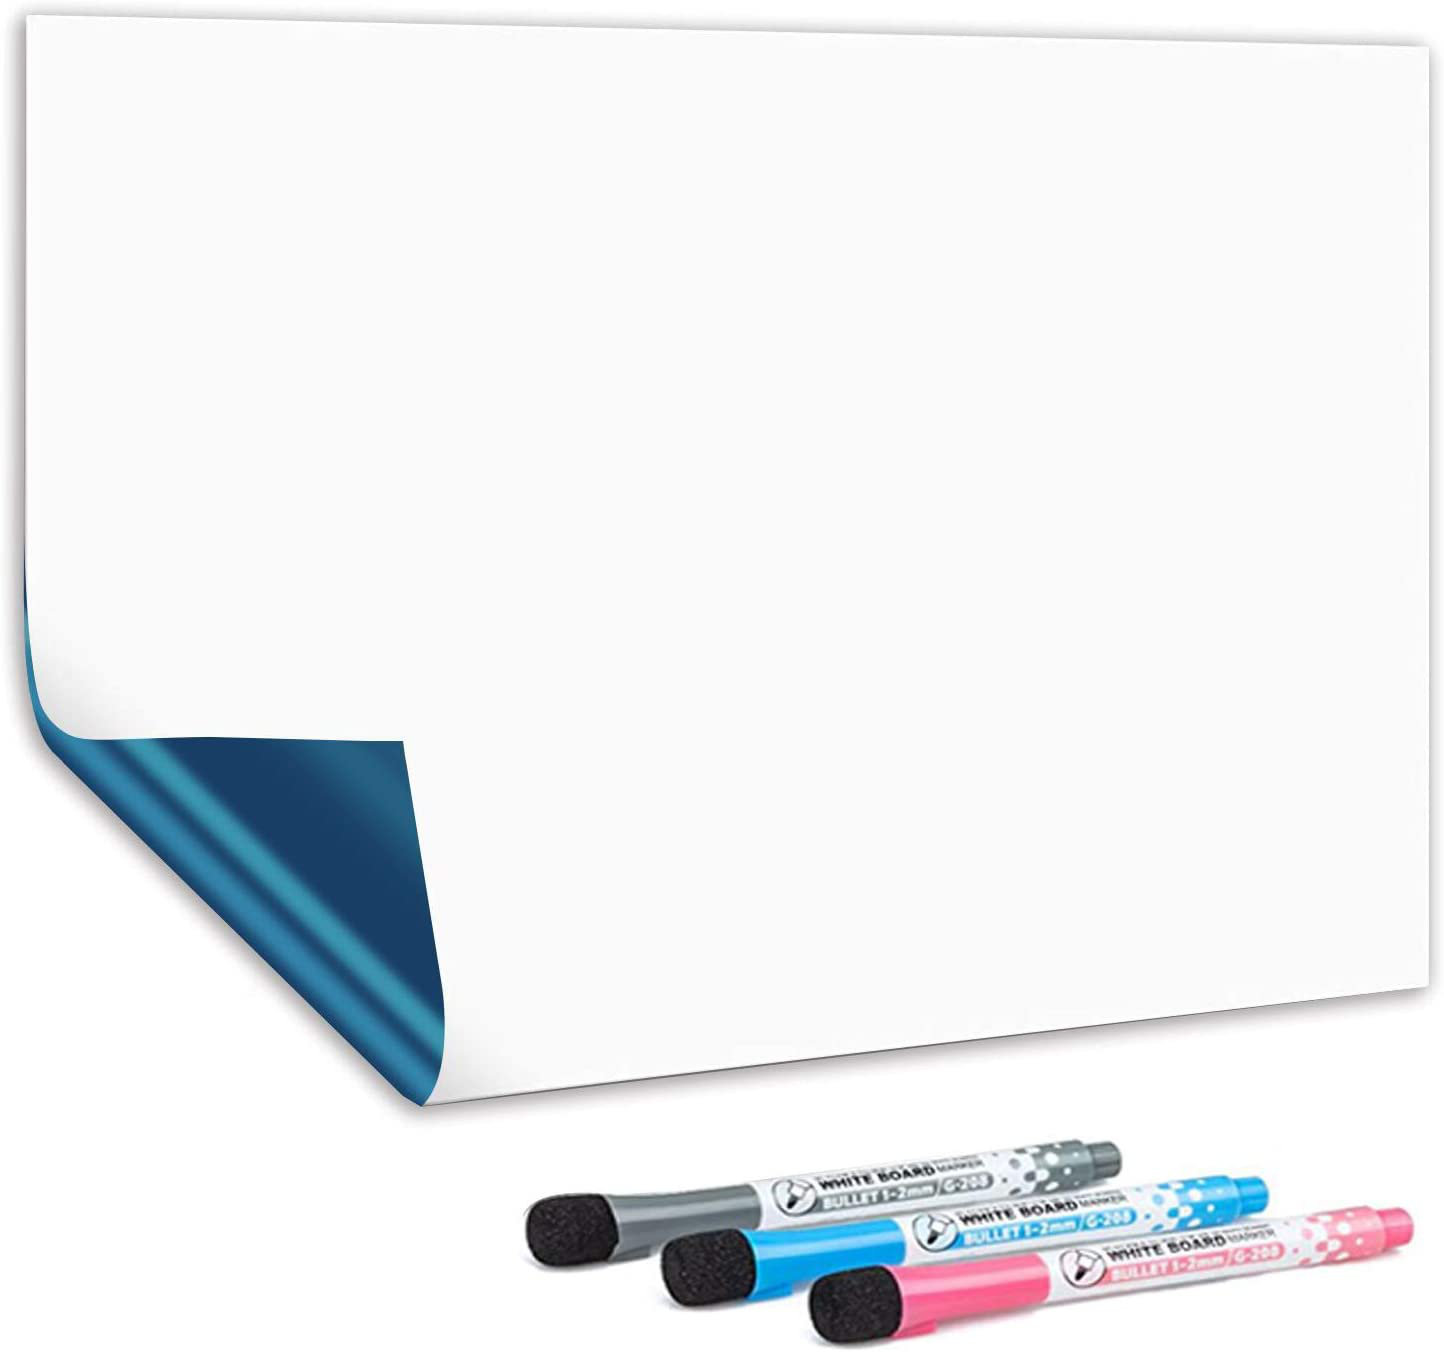 Volharding trainer Geven Symple Stuff Dry Erase Self Adhesive Magnetic Whiteboard Sticker For Any  Smooth Surface, Sticky Whiteboard Paper With Stain Resistant Technology,  Fridge Whiteboard For Weekly Meal Planner | Wayfair